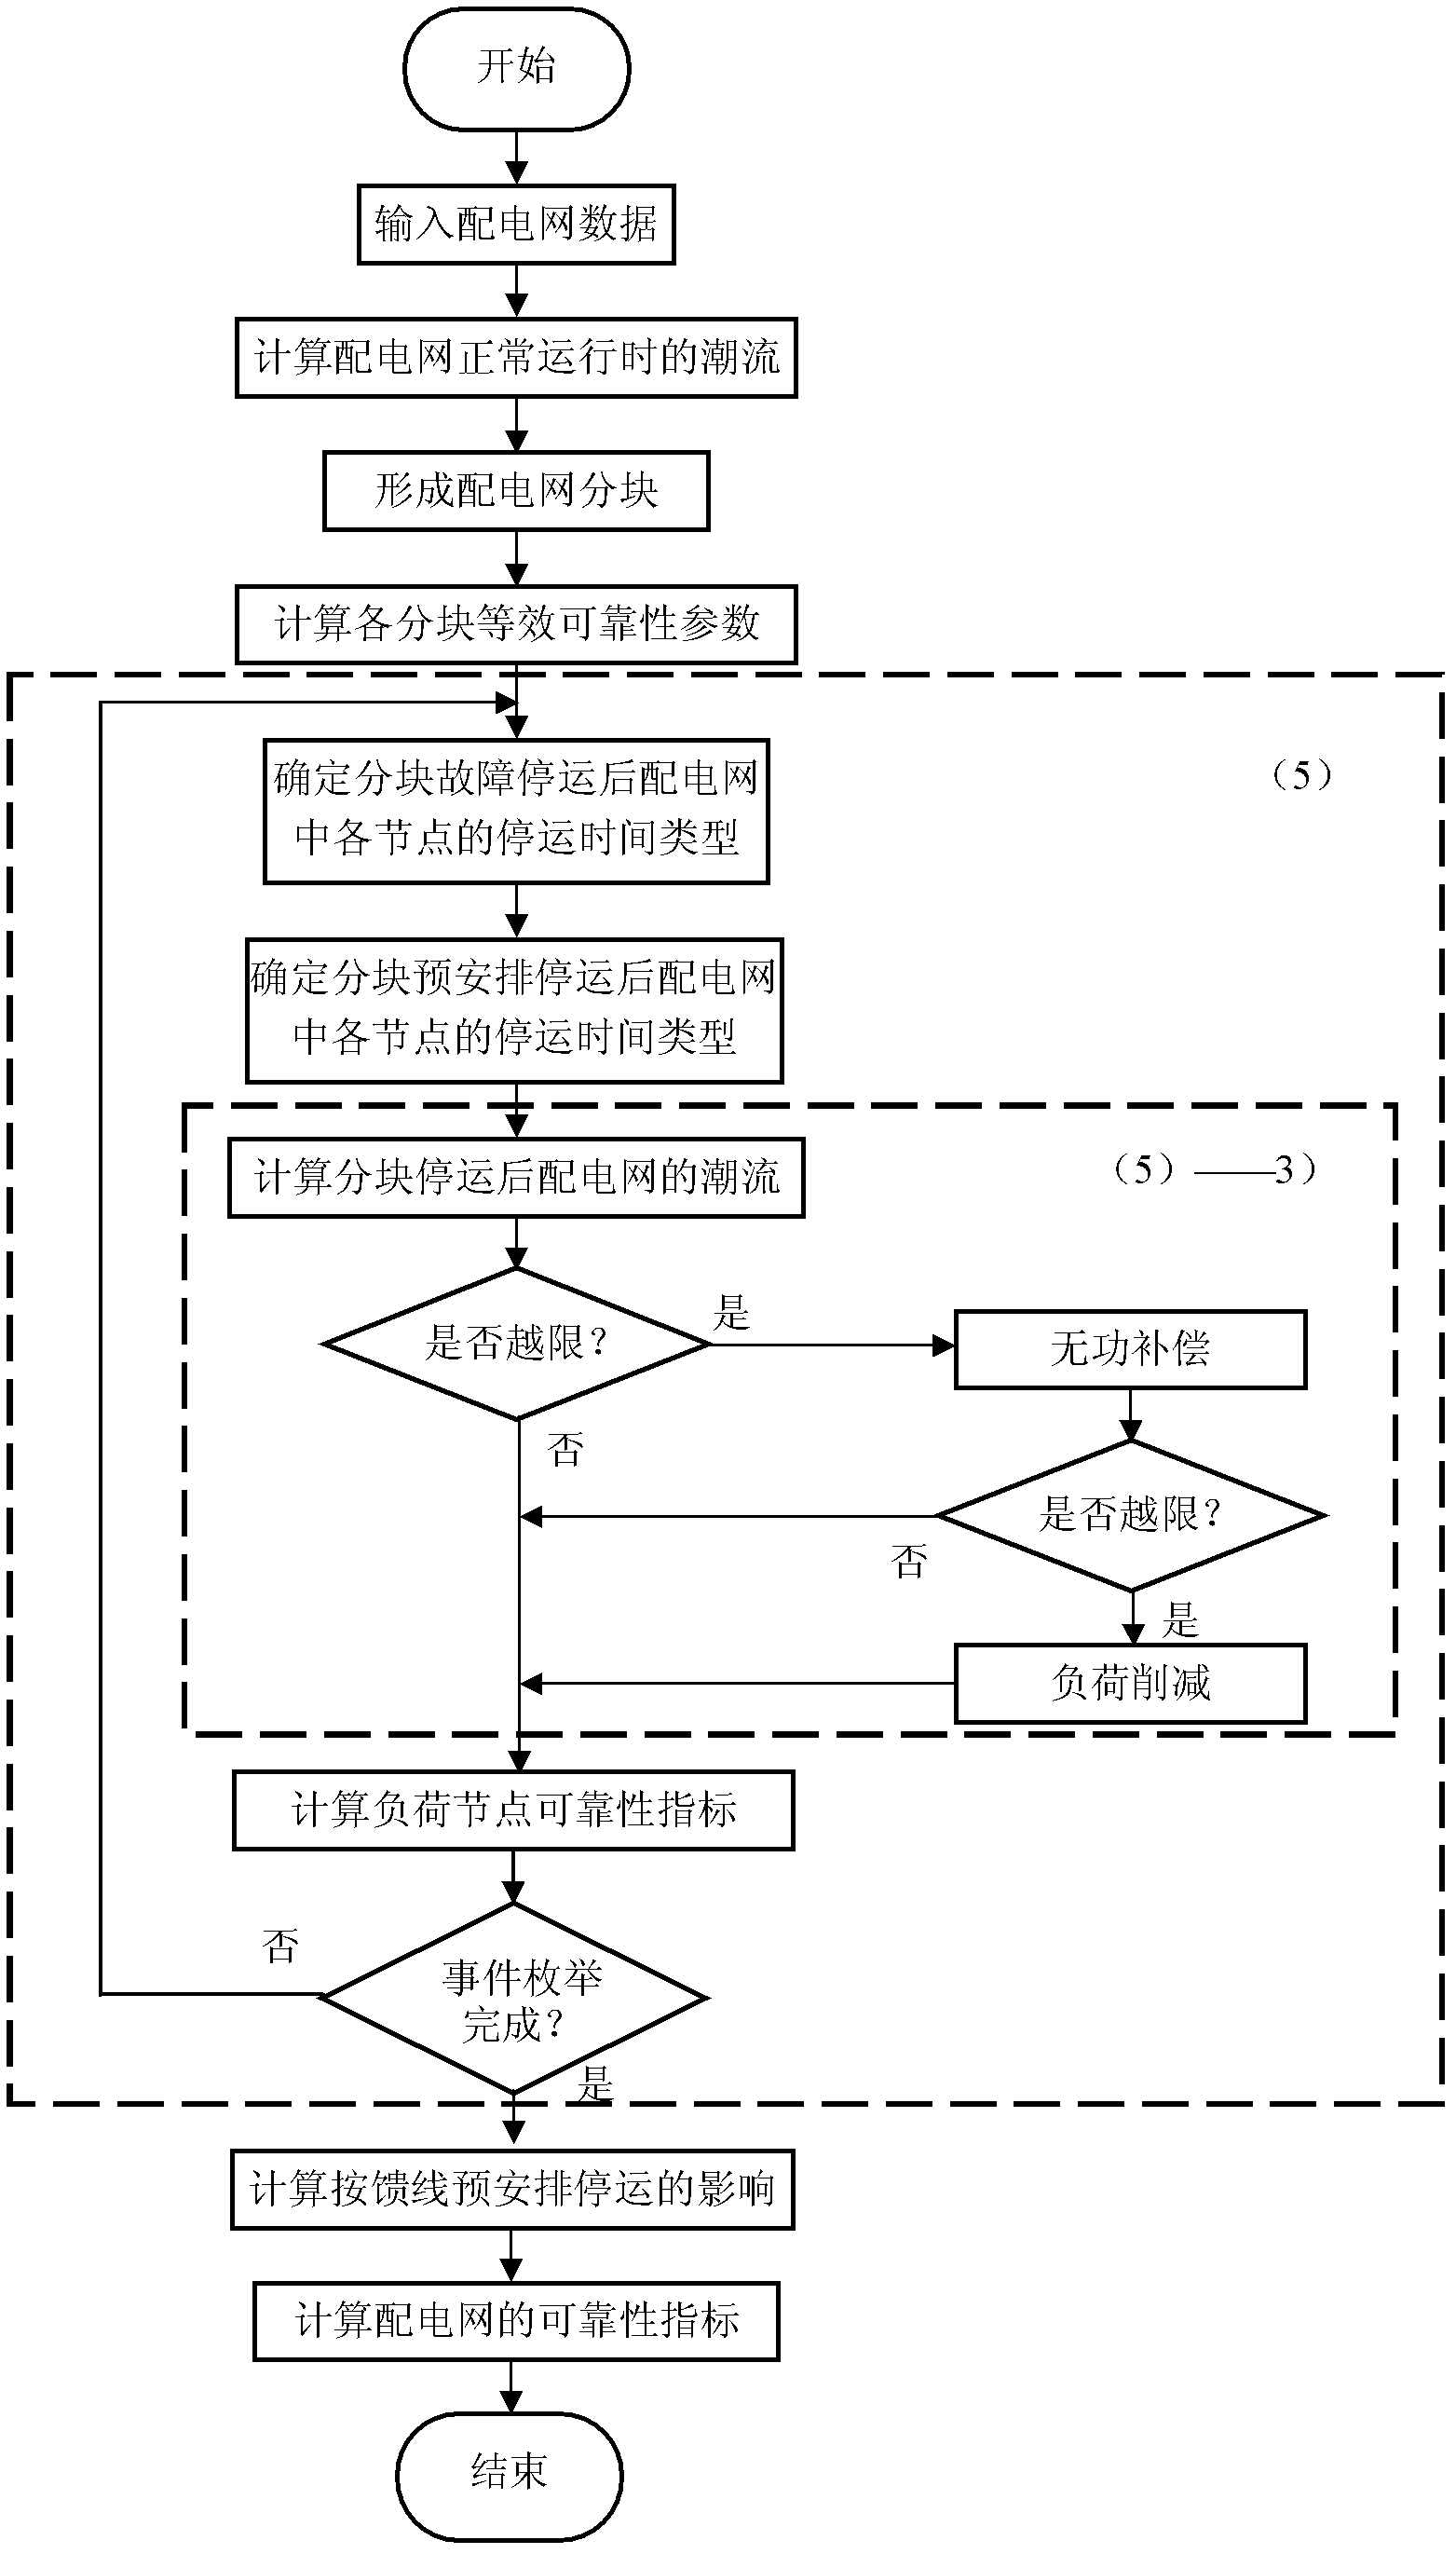 Distribution network reliability estimation method considering prearranged stoppage